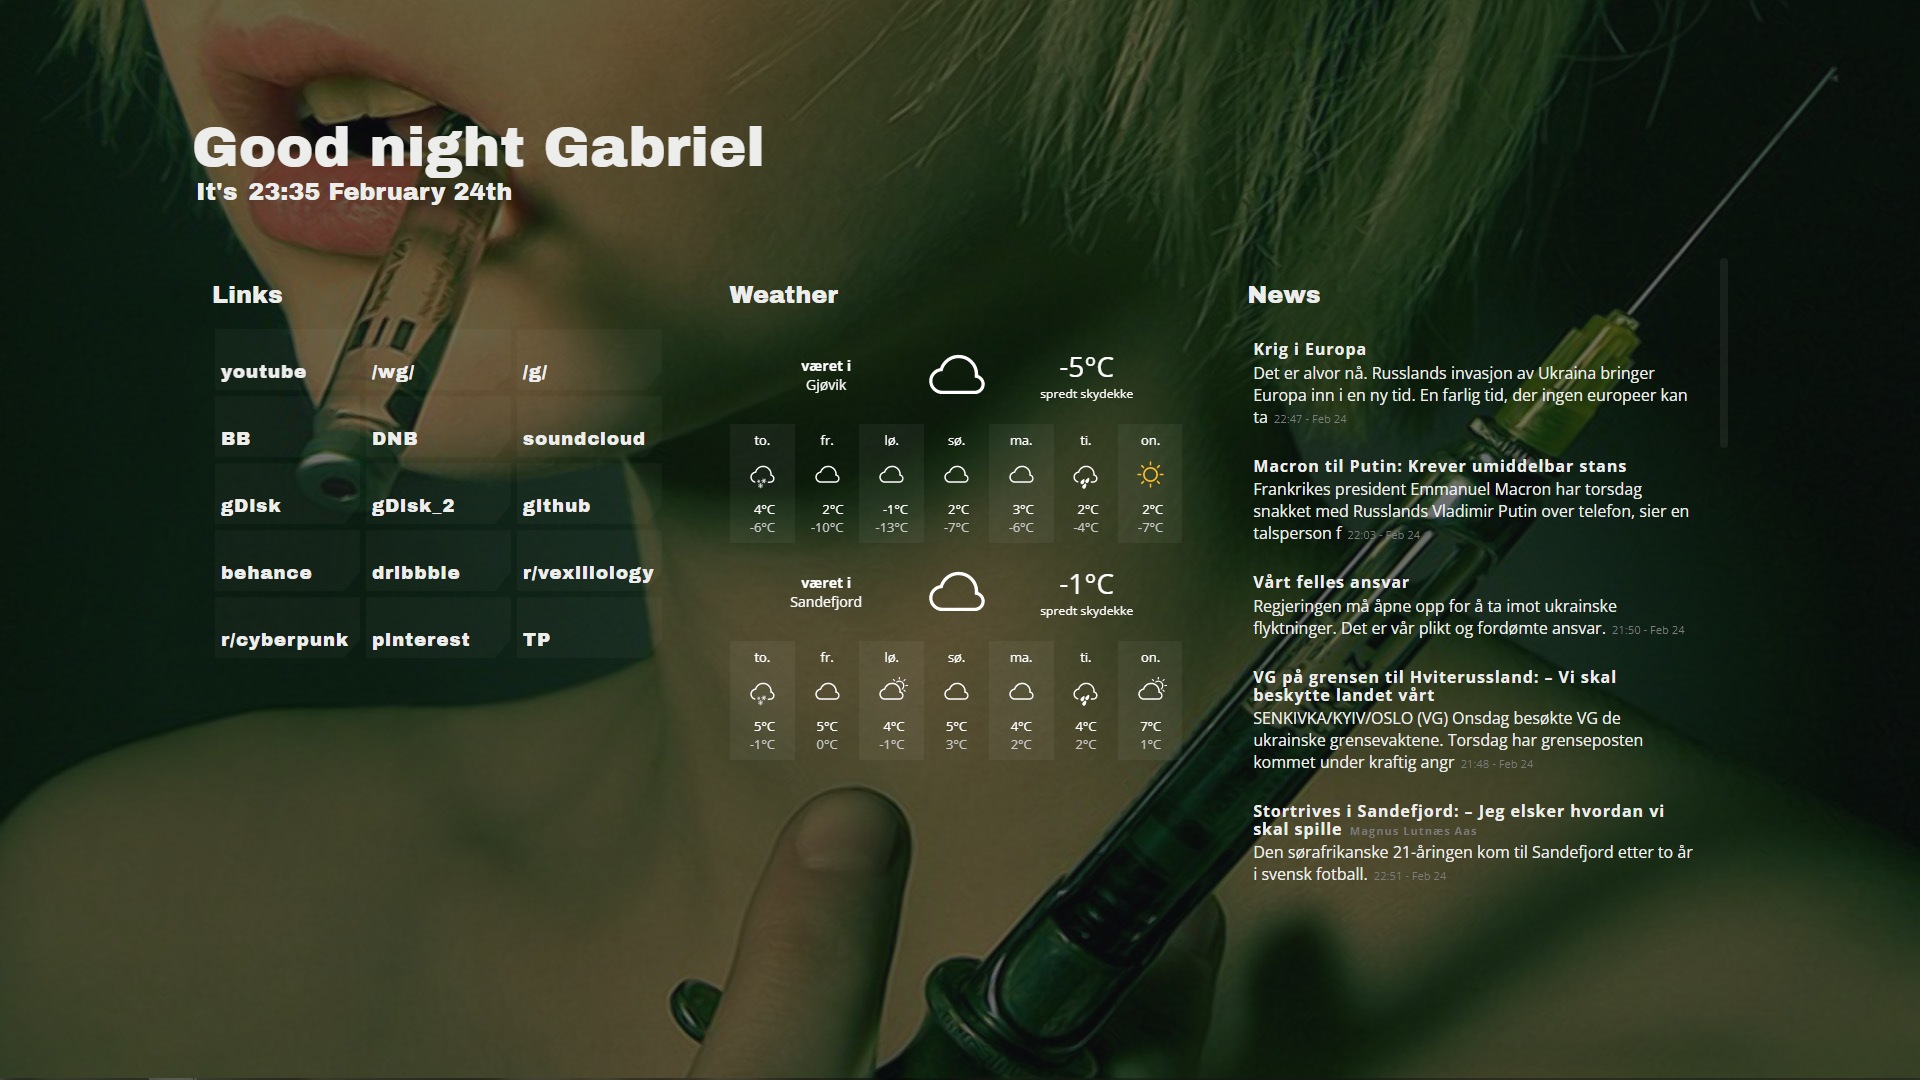 startpage userinterface on background of science fiction girl